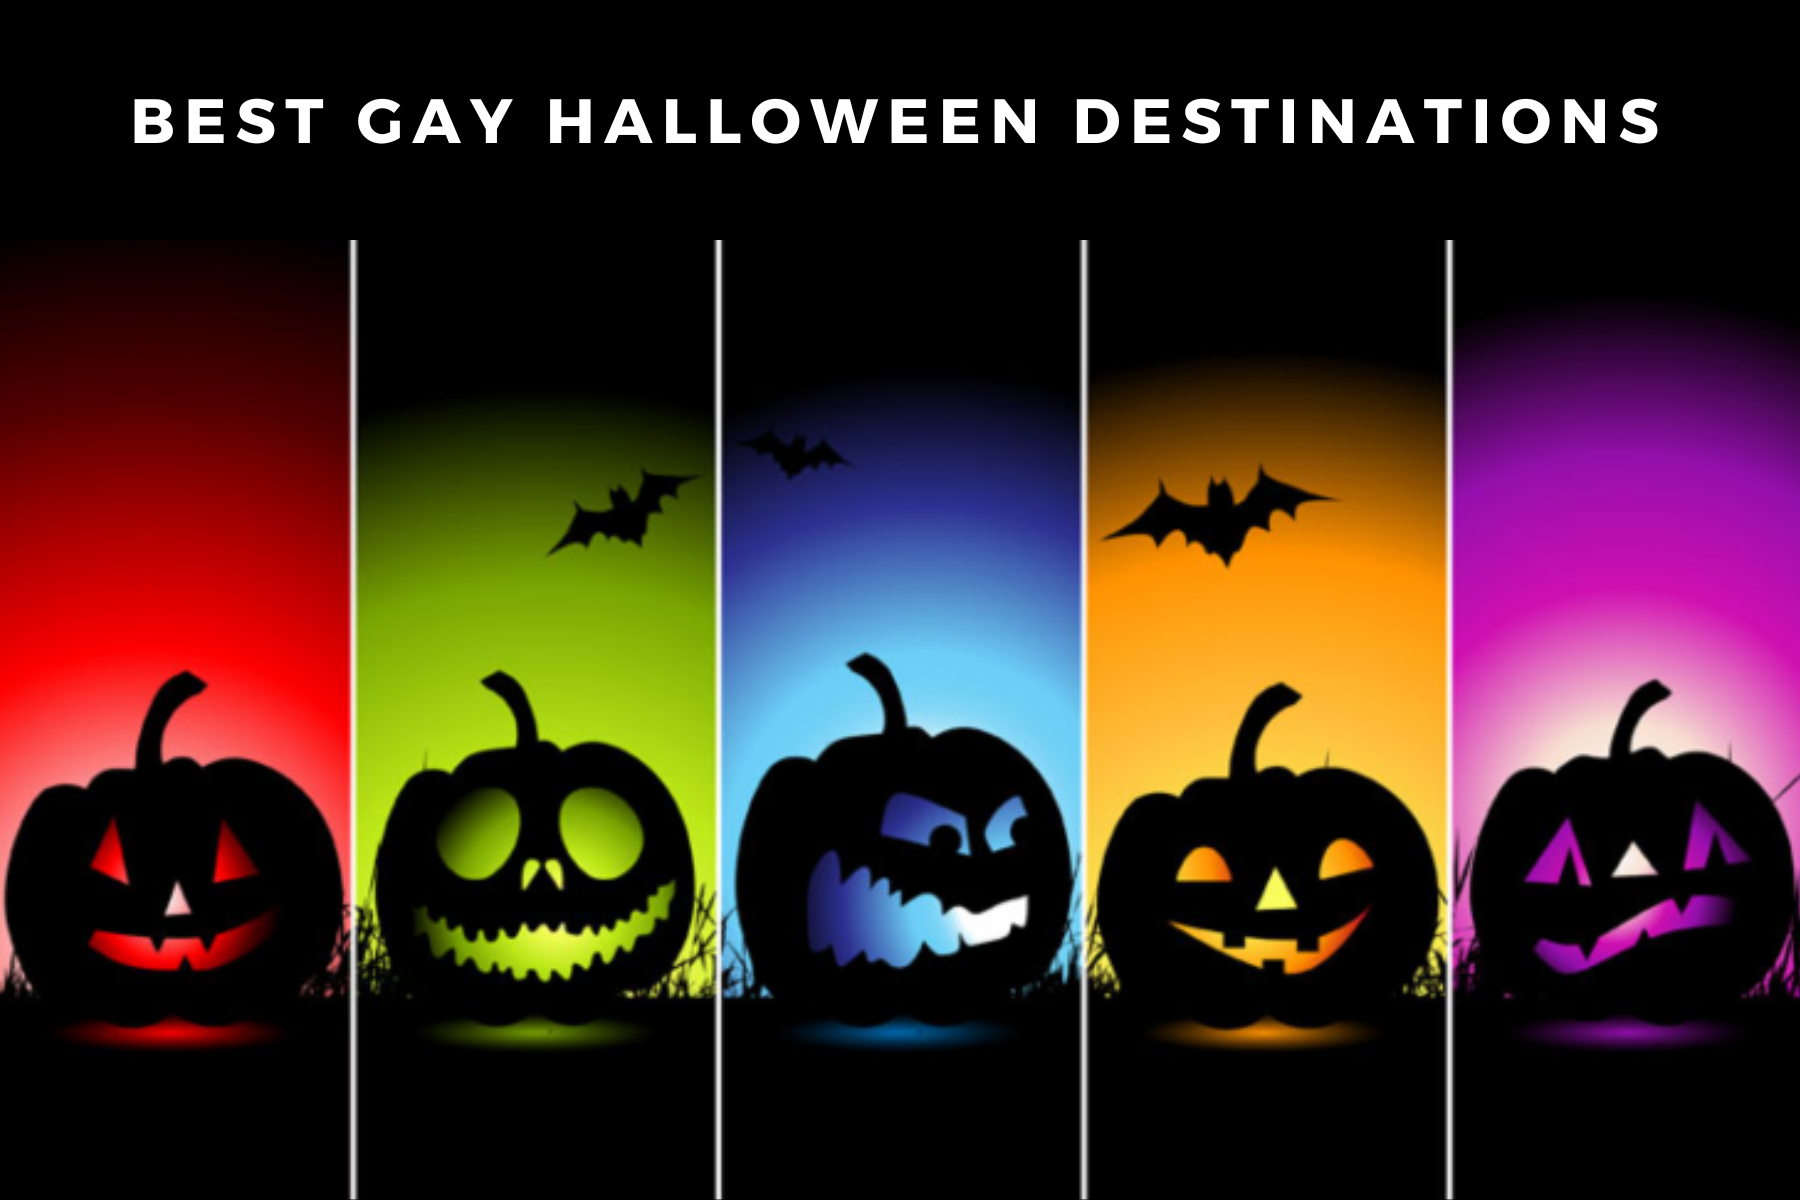 Best Gay Halloween Destinations - Places That Host LGBTQ Events